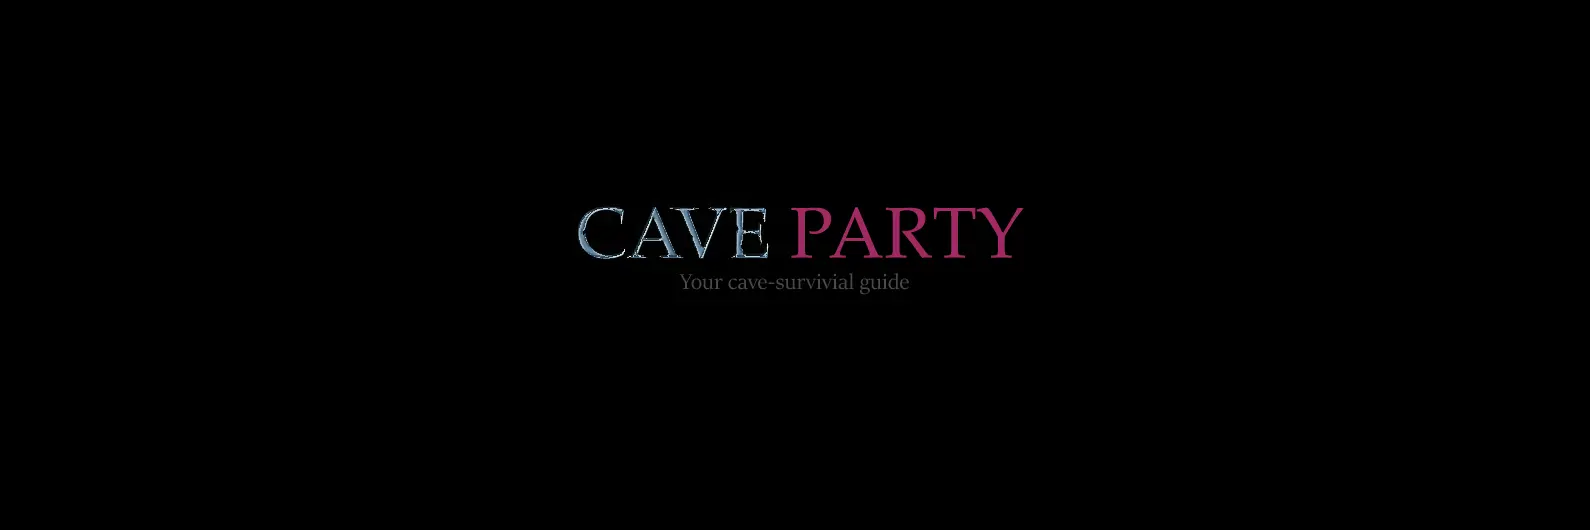 Cave Party main image